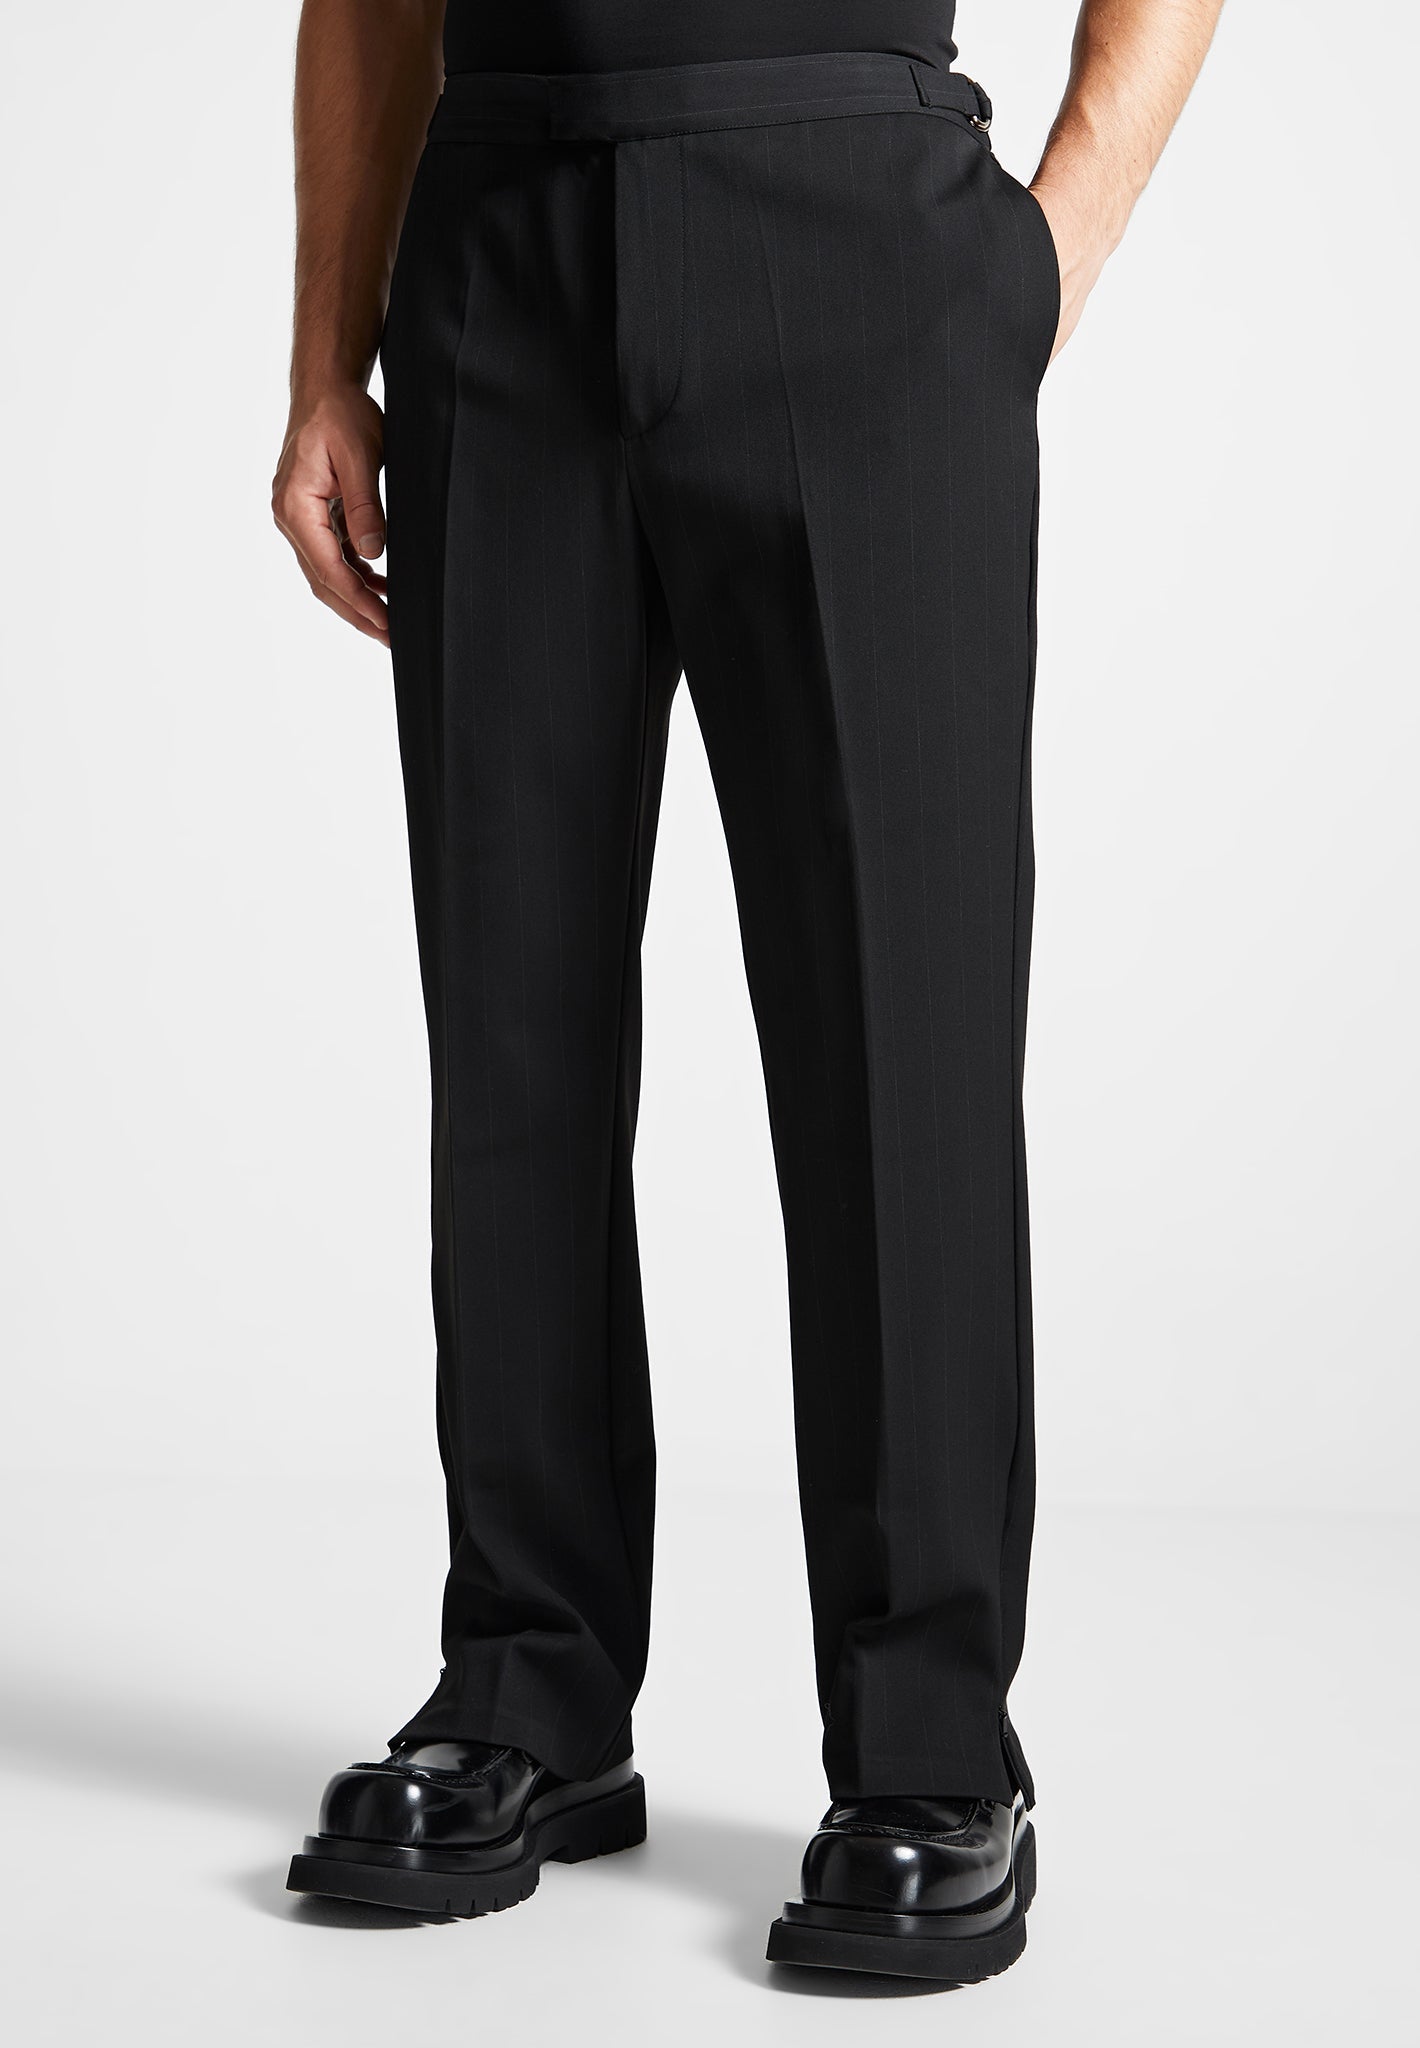 Express Editor Mid Rise Pinstripe Relaxed Trouser Pant Black